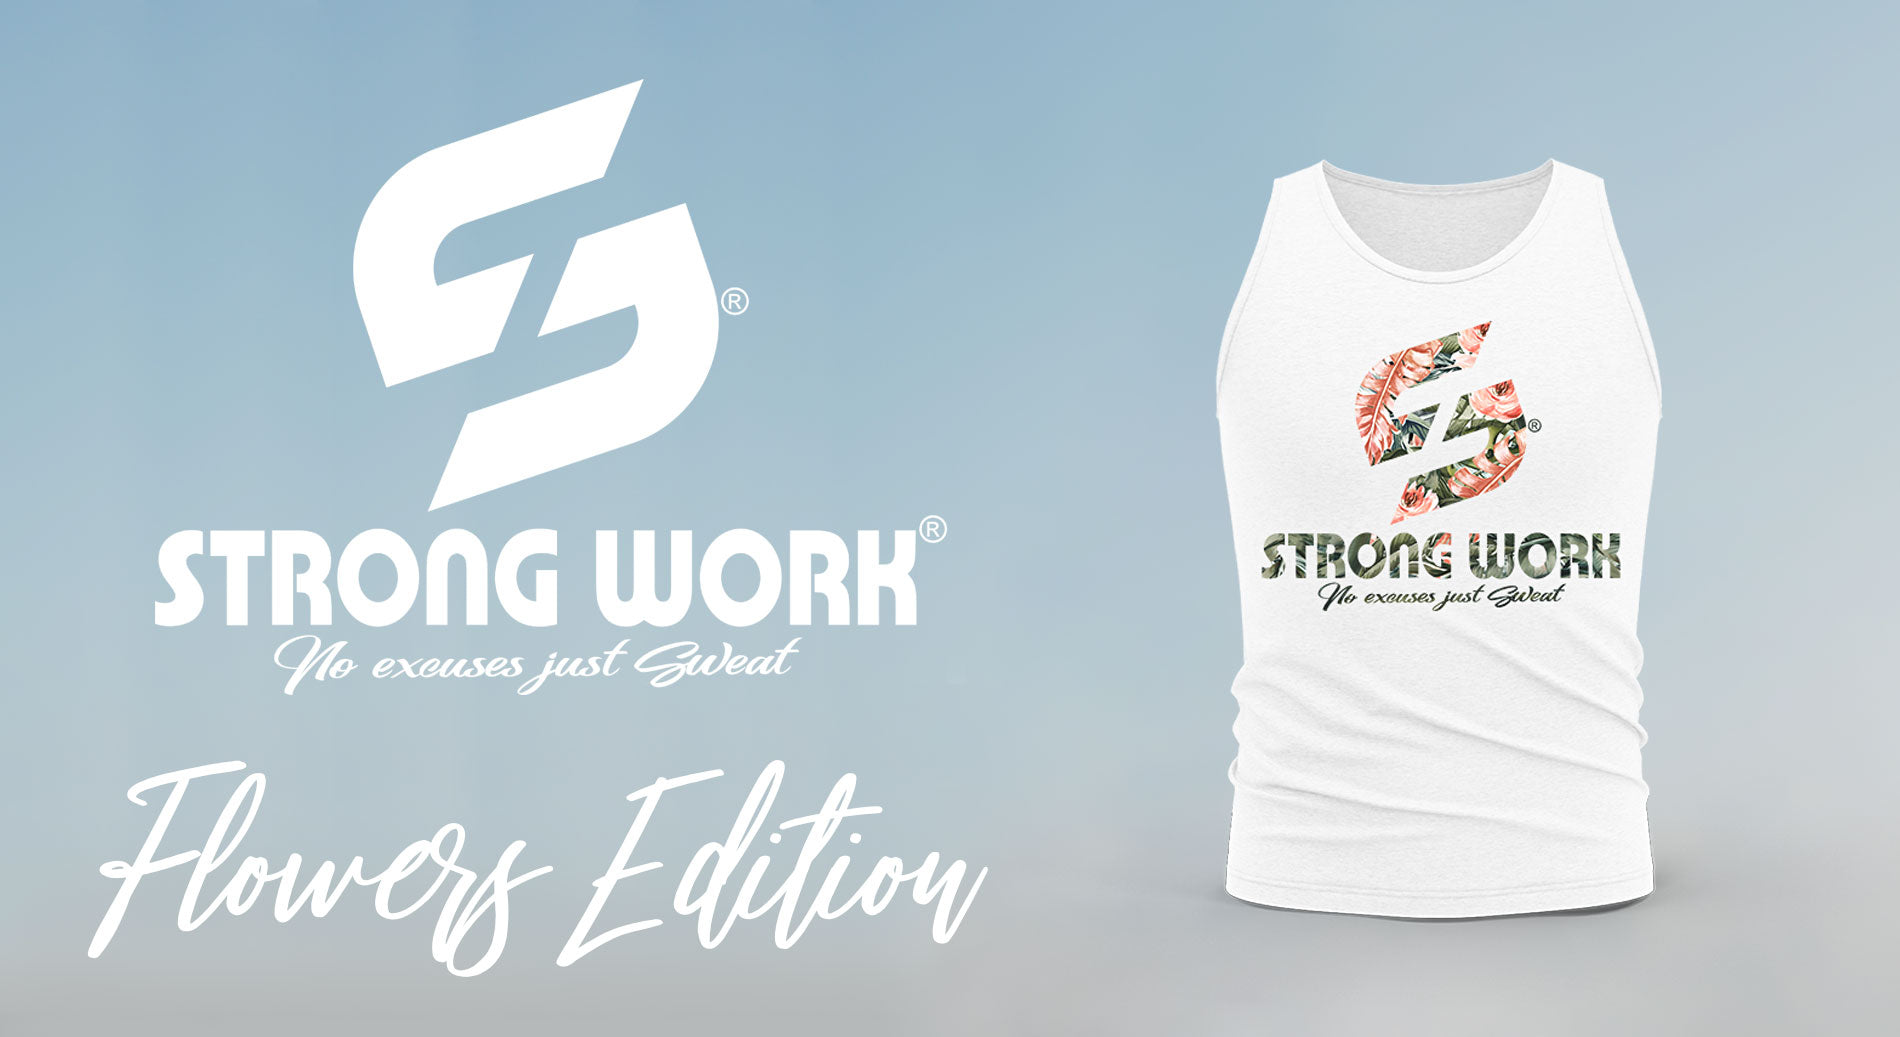 STRONG WORK FLOWERS EDITION FOR WOMEN